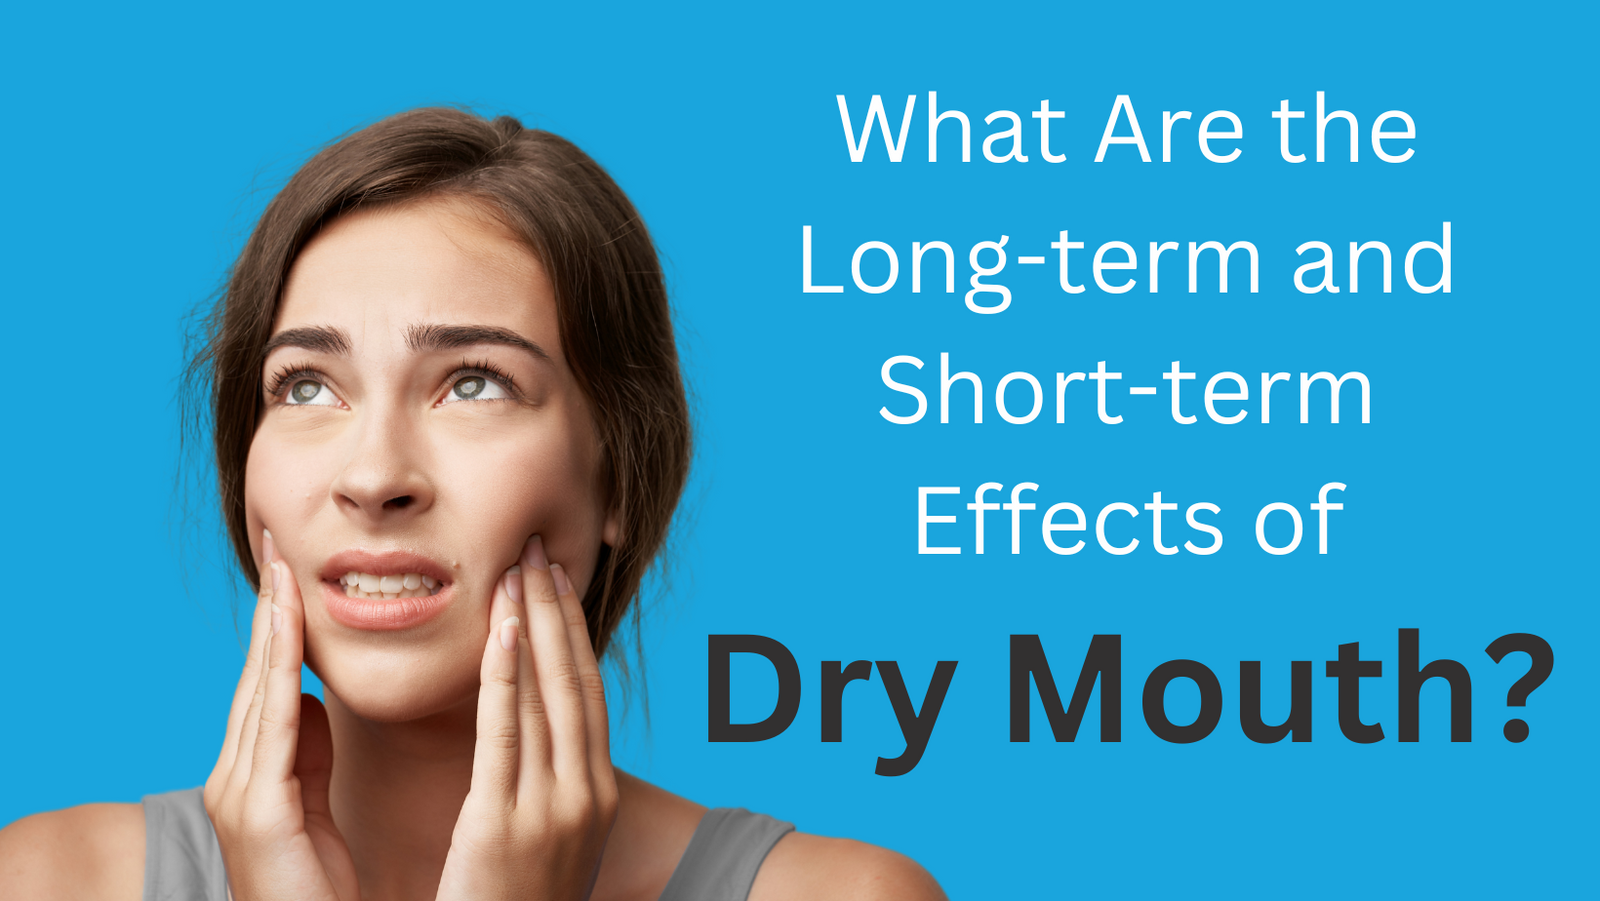 Cancer Patients: What Are the Long-Term & Short-Term Effects of Dry Mouth?